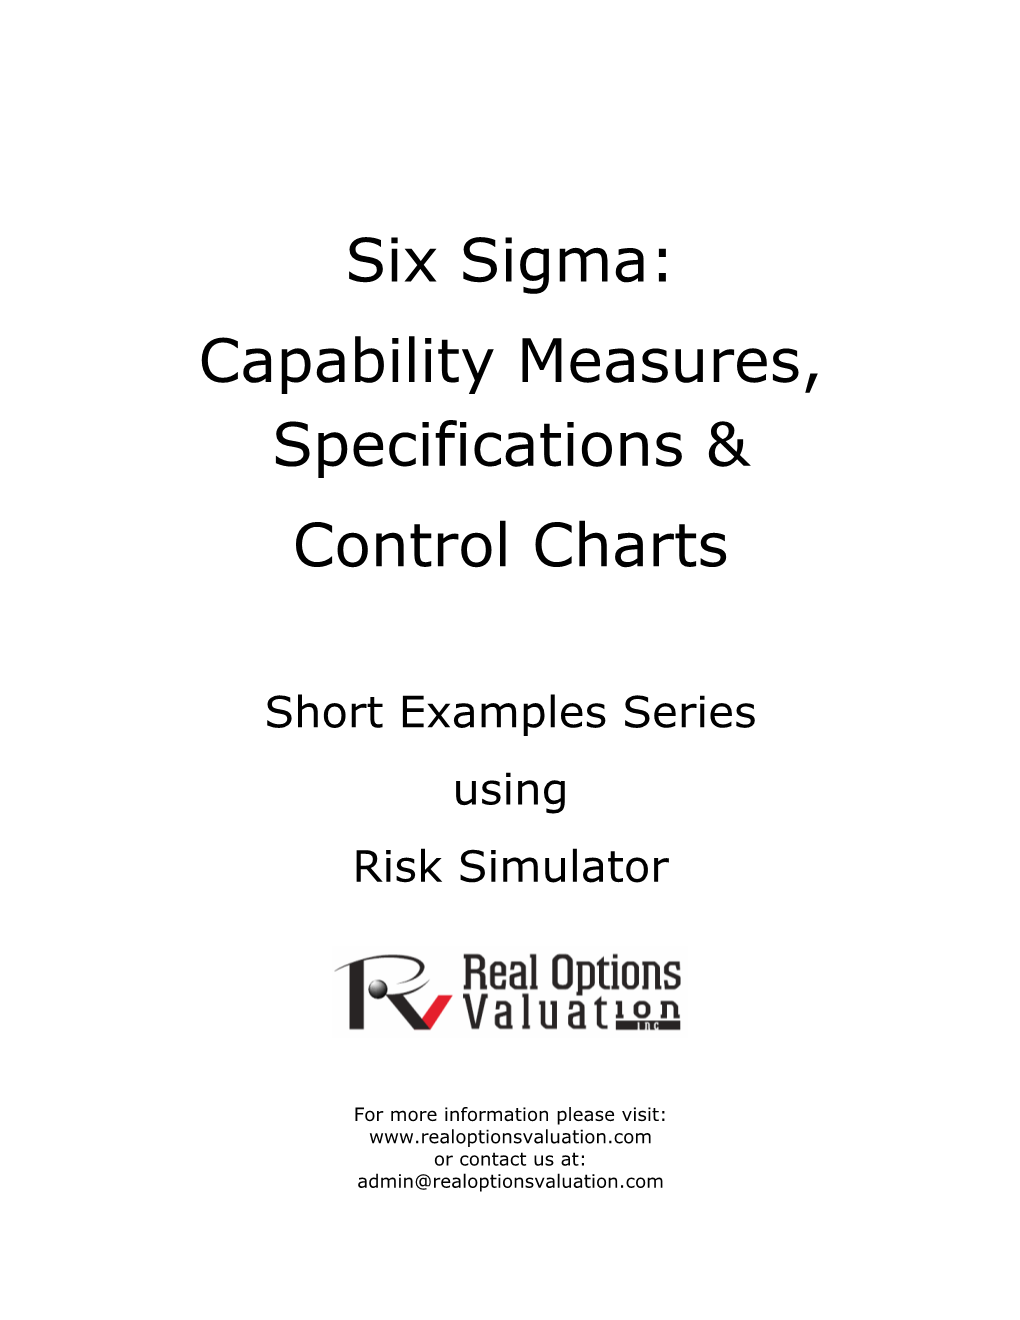 Six Sigma: Capability Measures, Specifications & Control Charts